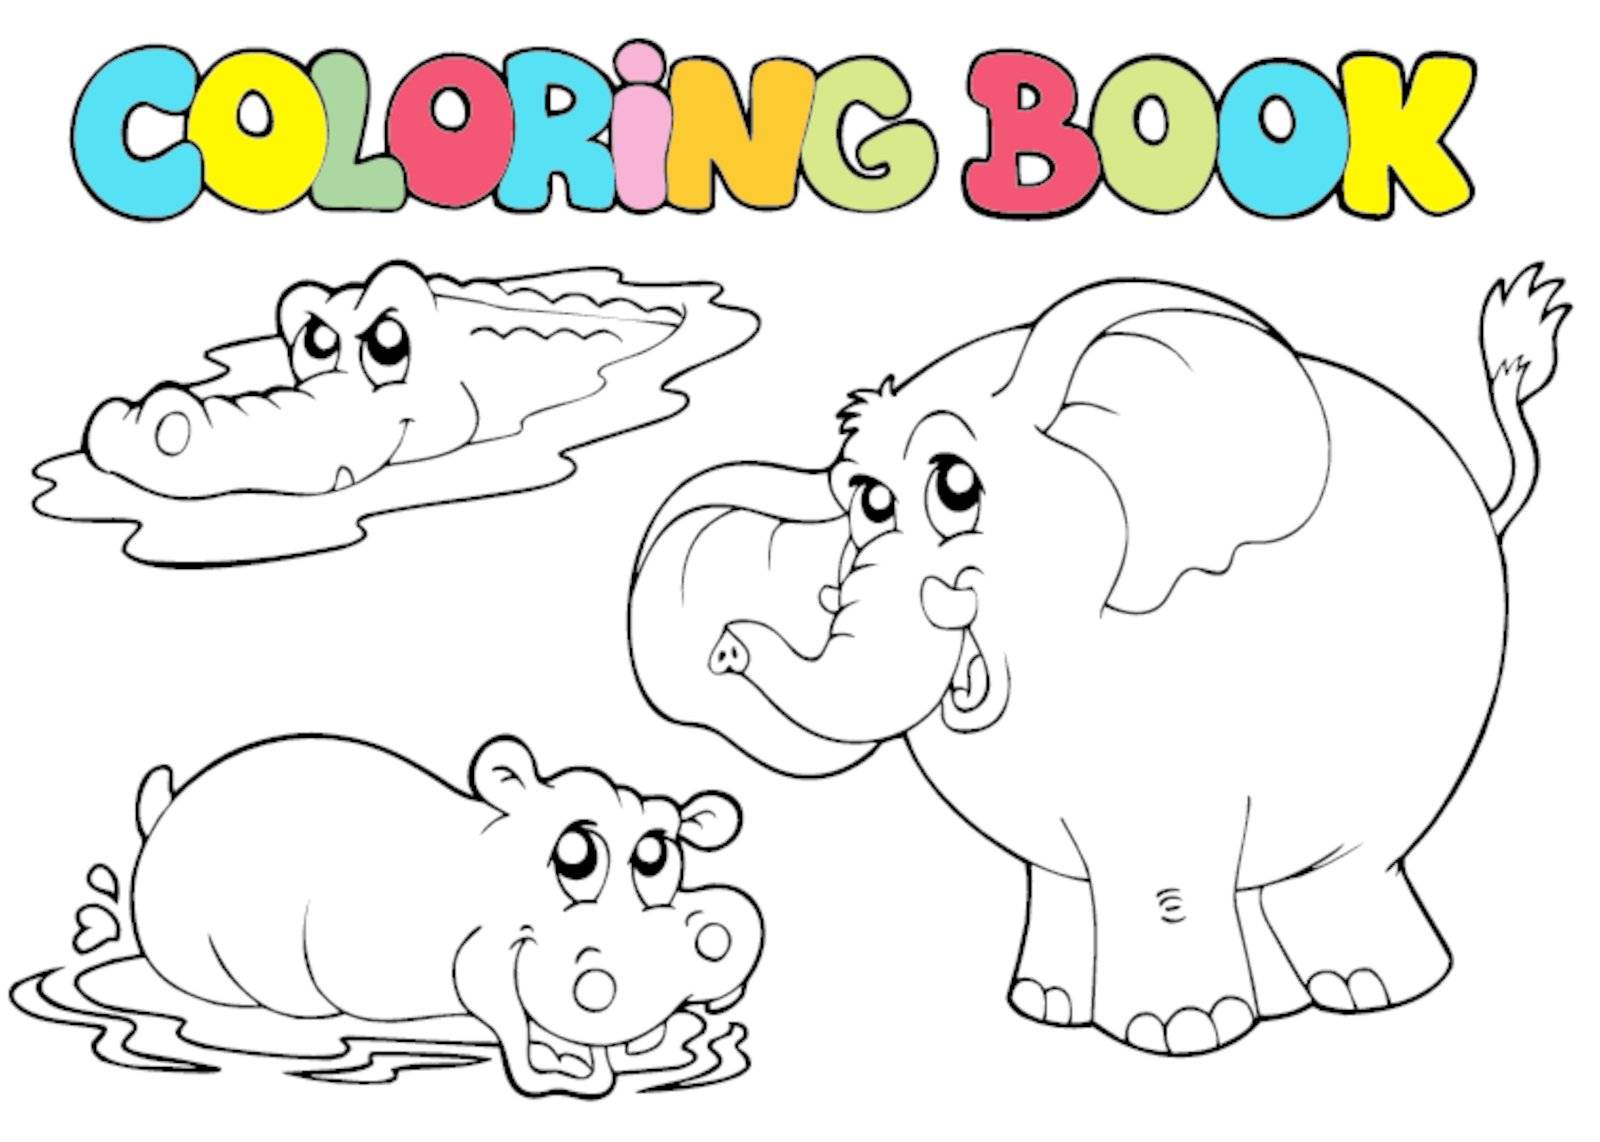 Coloring book with tropic animals 1 - vector illustration.